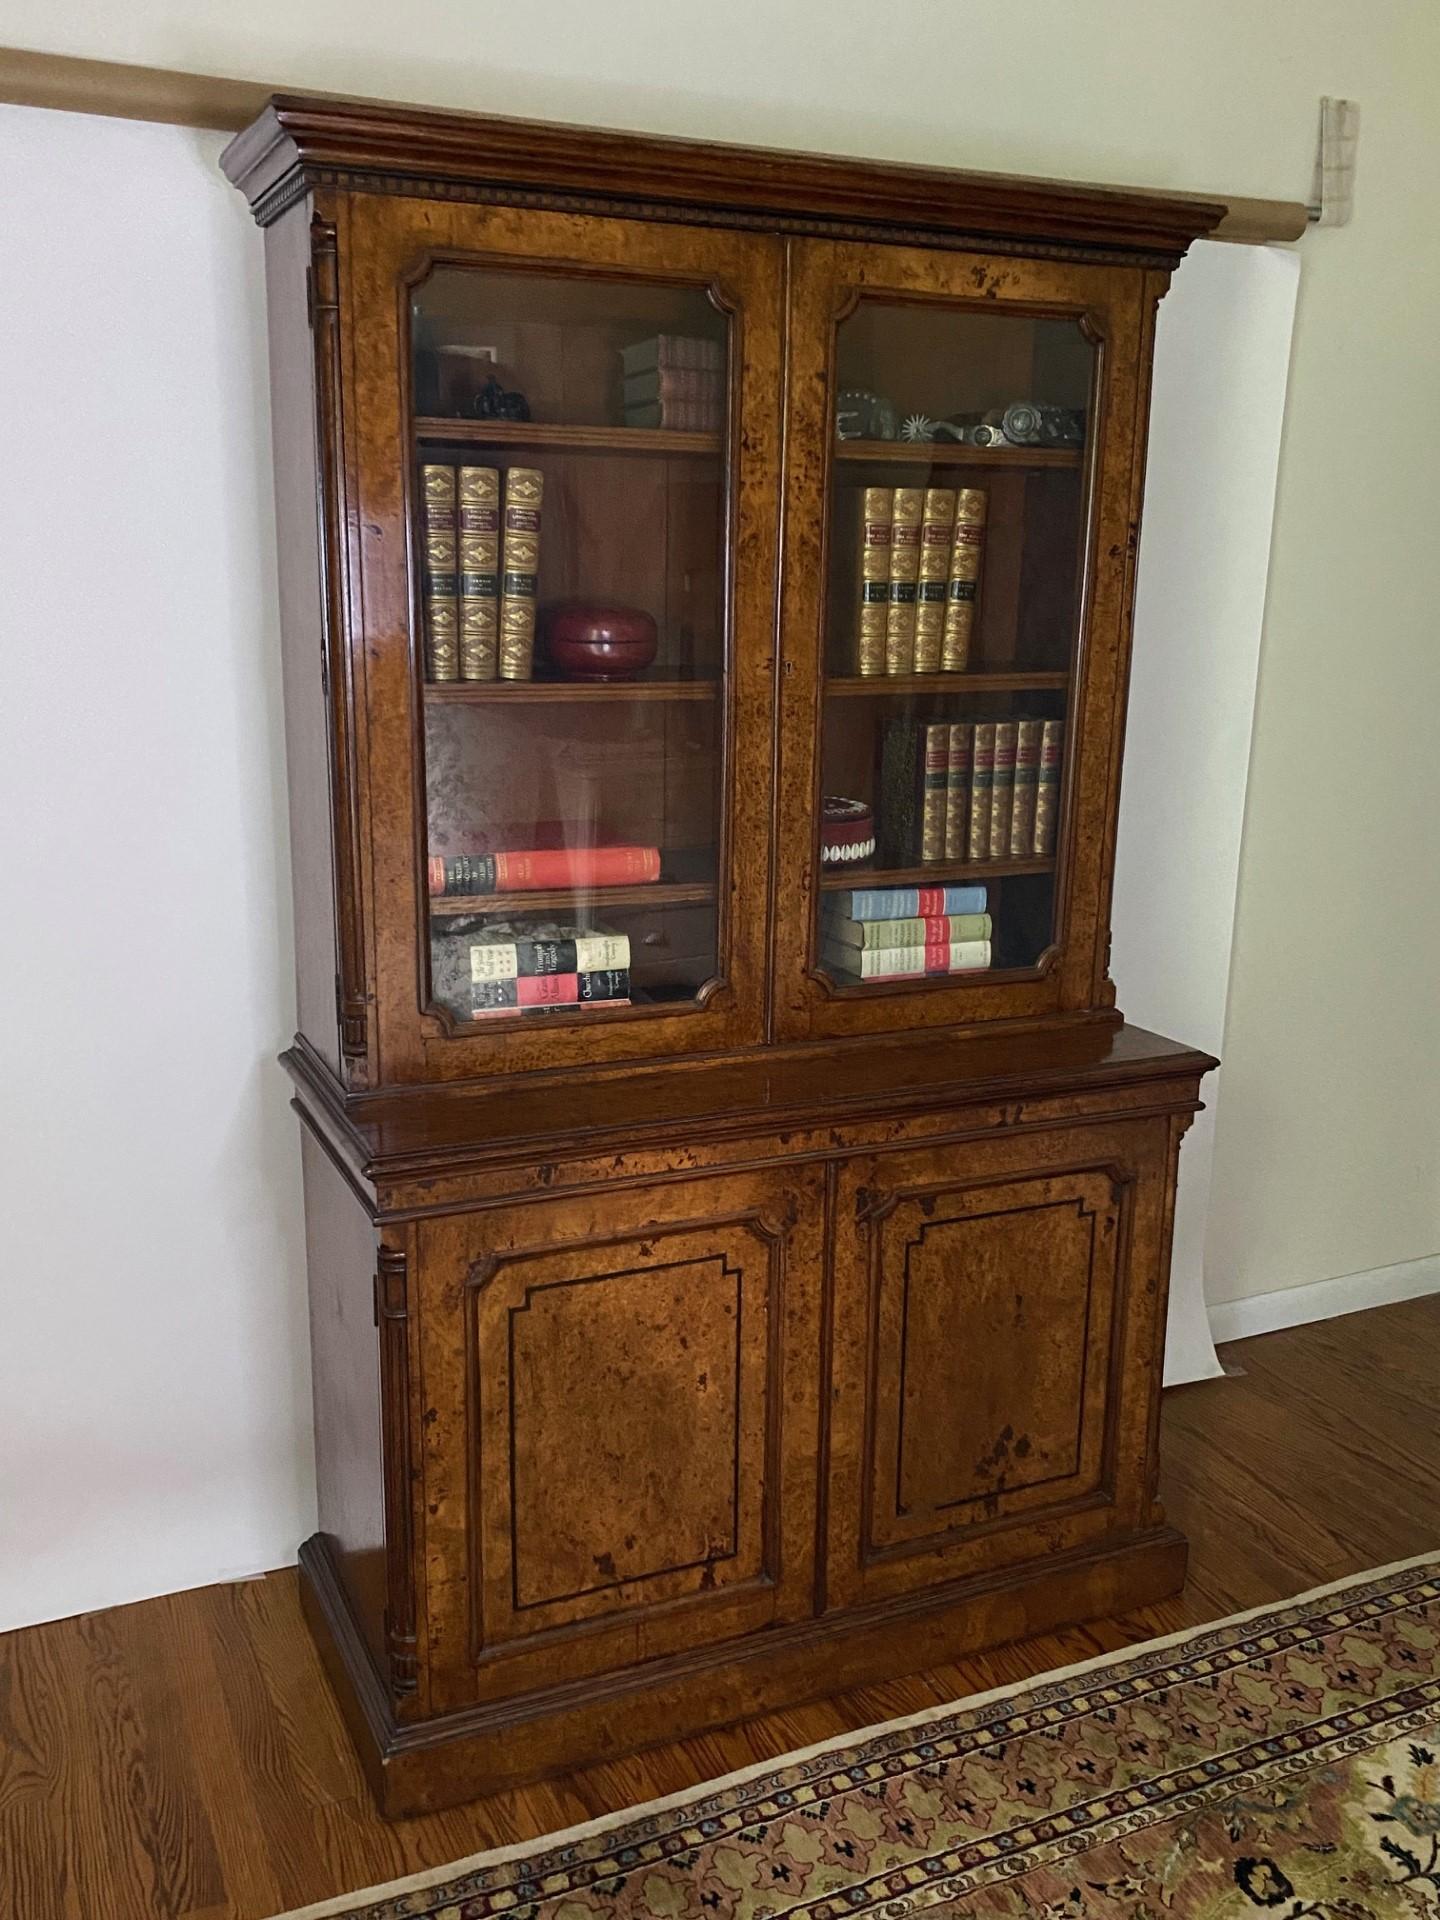 This Fine Antique William IV Burr Oak Bookcase is a piece of furniture from the William IV era, which lasted from 1830 to 1837 in England. This bookcase features both functional and decorative elements characteristic of this period's design